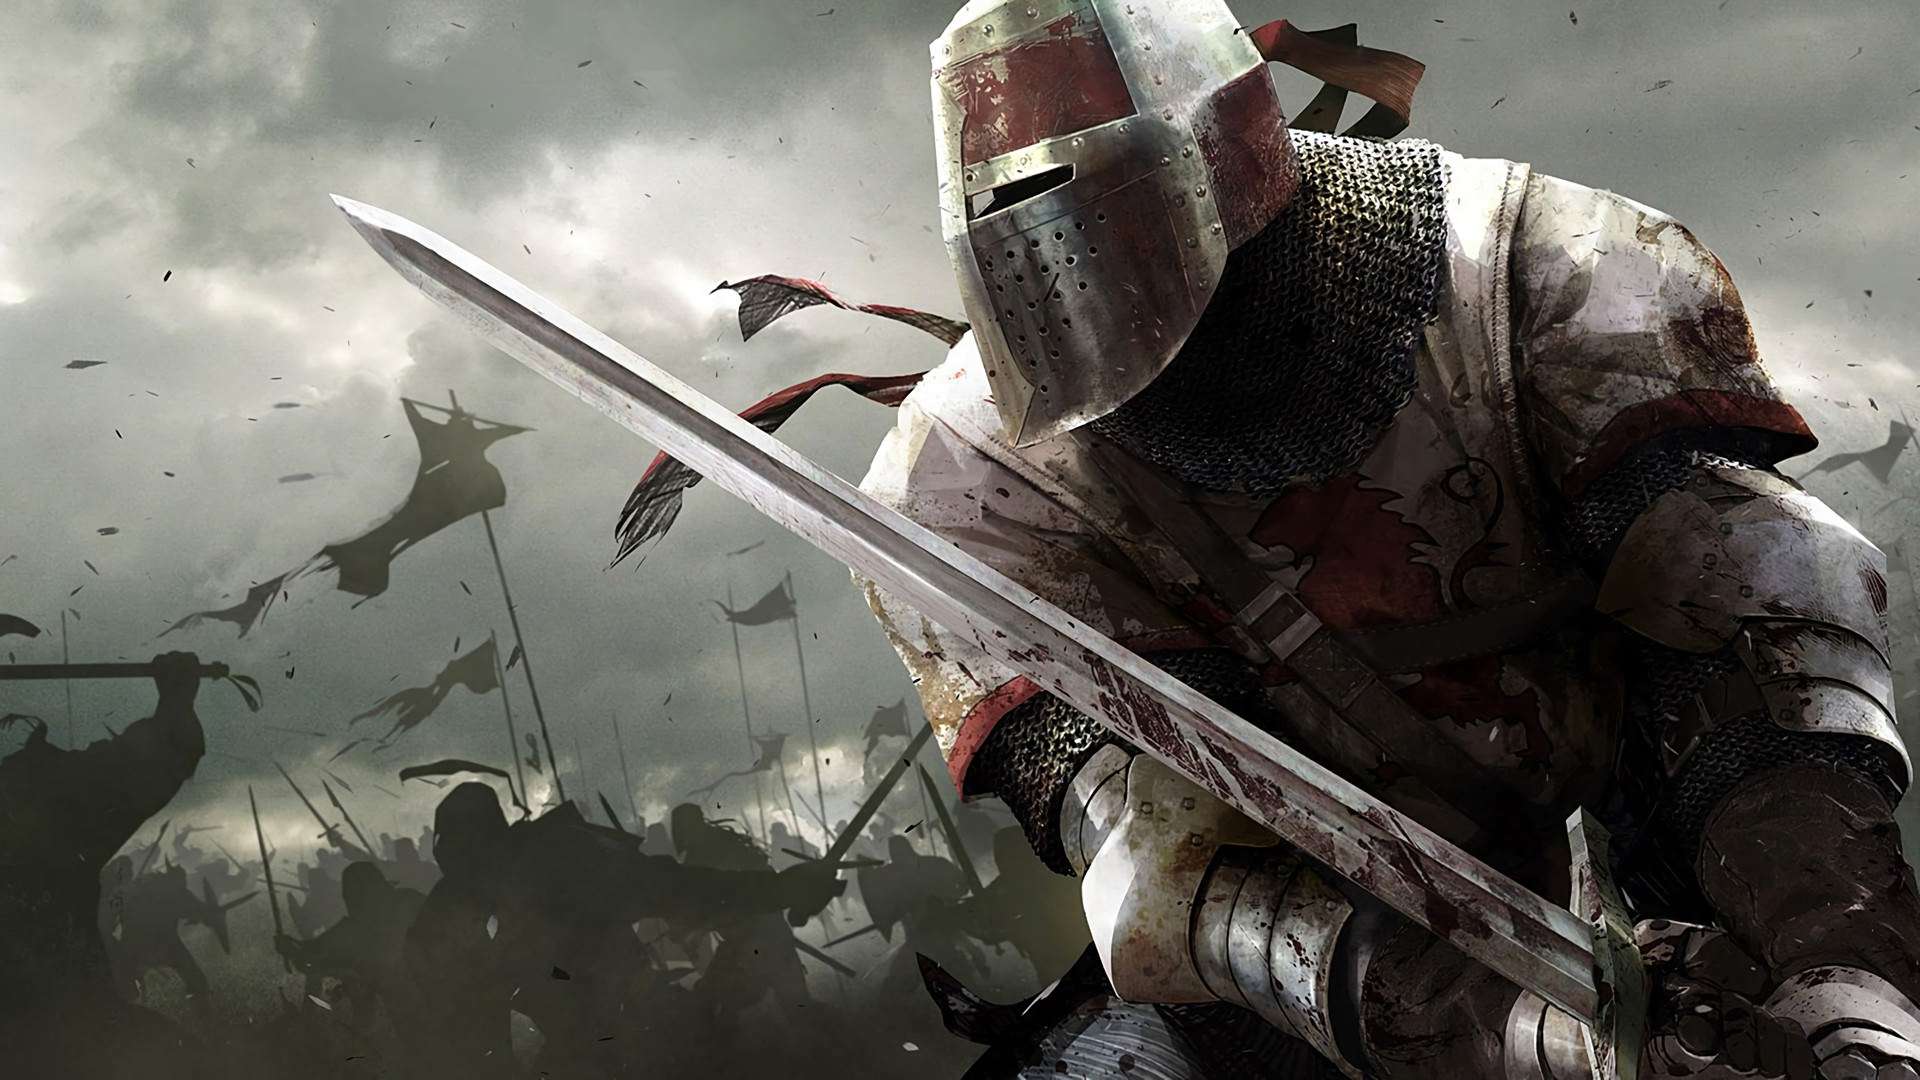 Medieval Knights Wallpapers   4k HD Medieval Knights Backgrounds 1920x1080